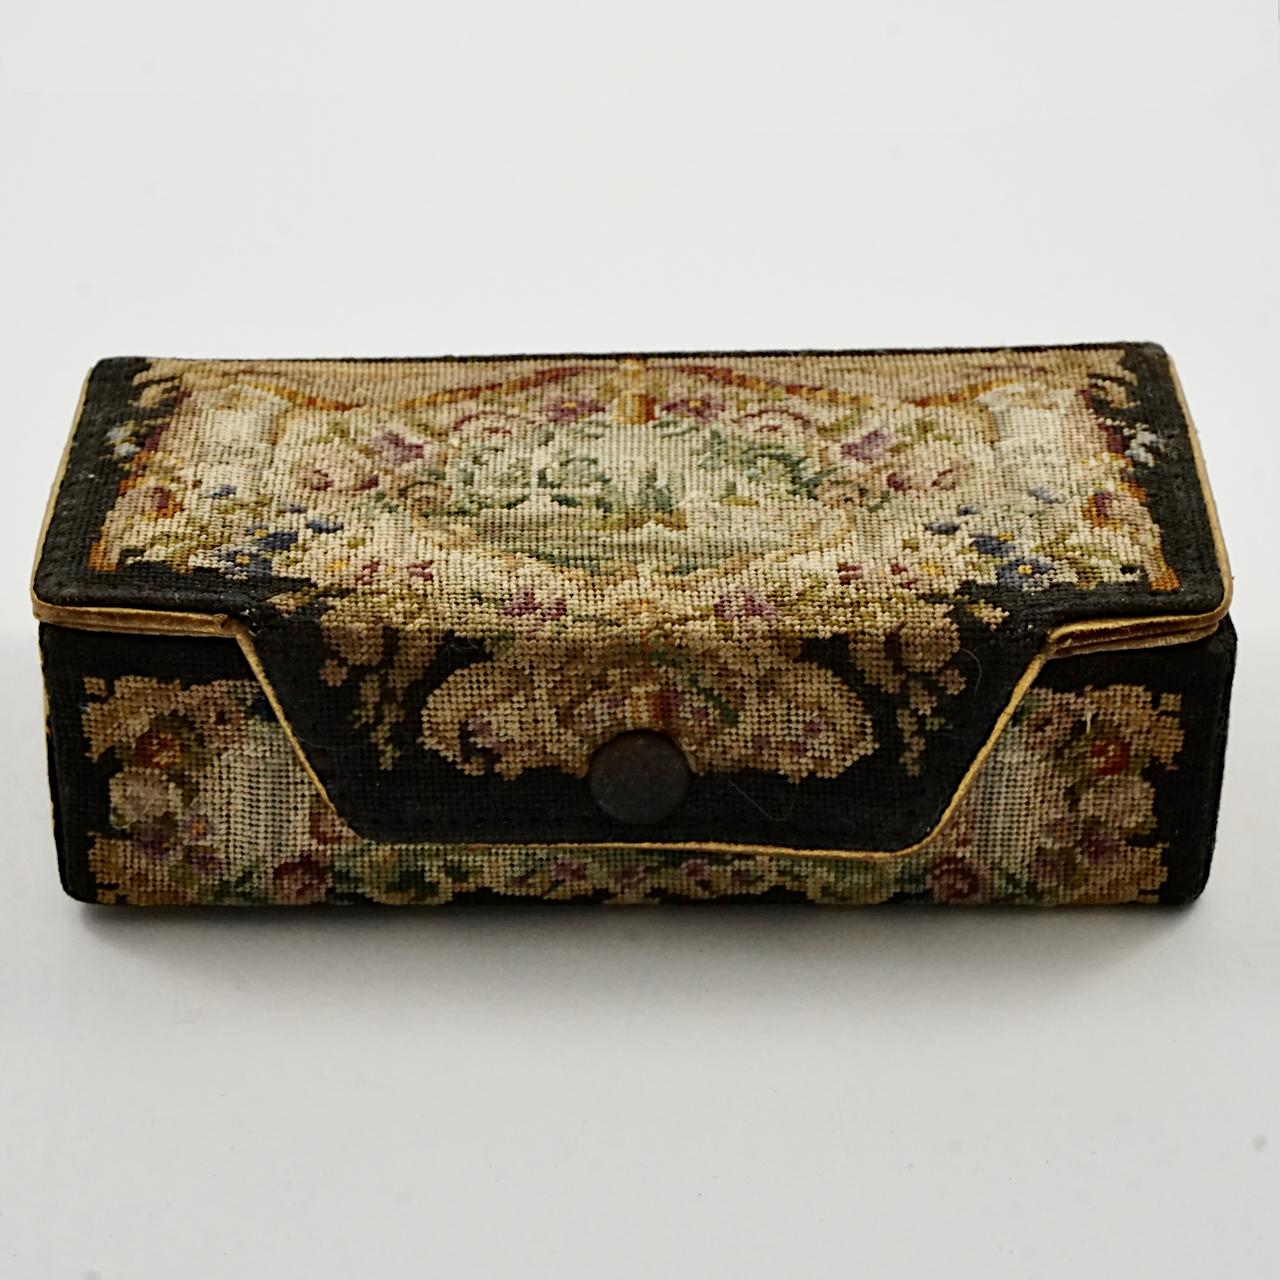 Petit Point Opera Glasses in a Petit Point Case with Gold Leather Moiré Lining 3